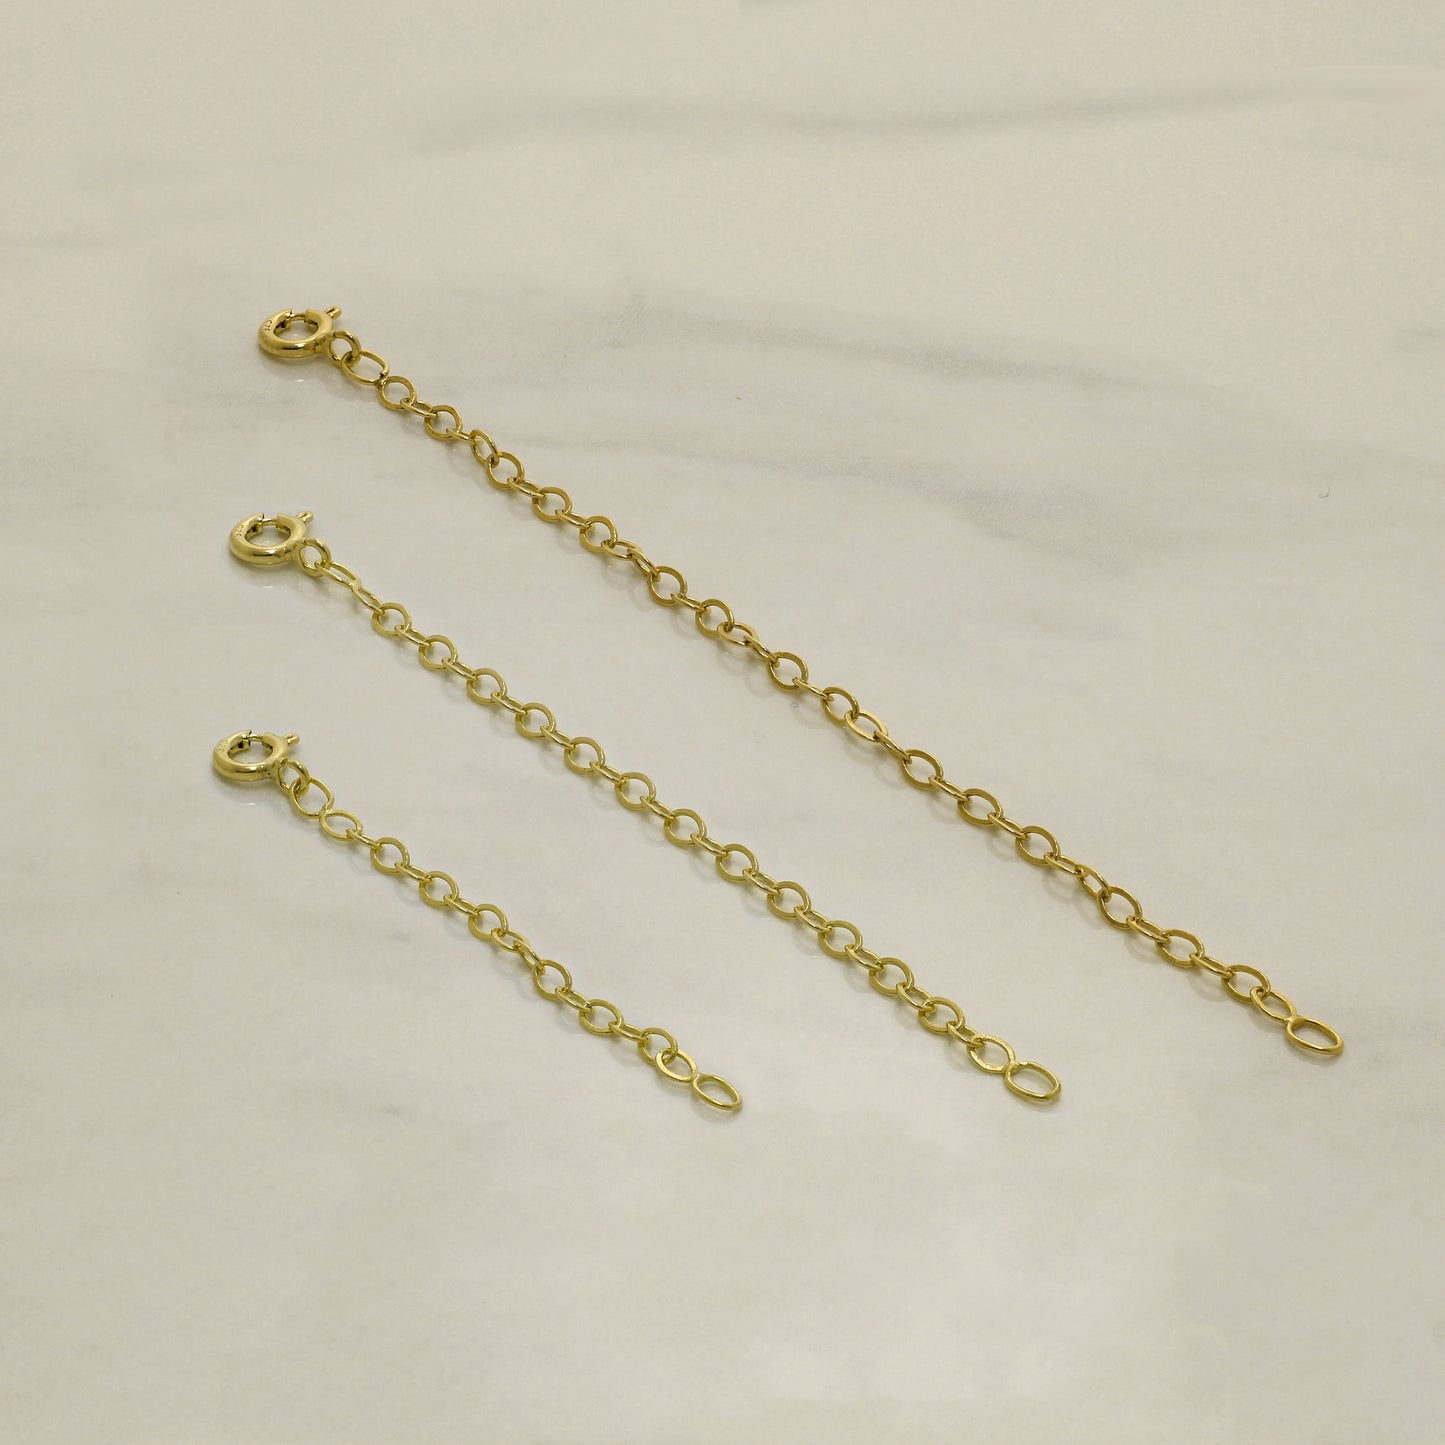 Gold Plated Sterling Silver Belcher Extender 2-4 Inches With Bolt Clasp